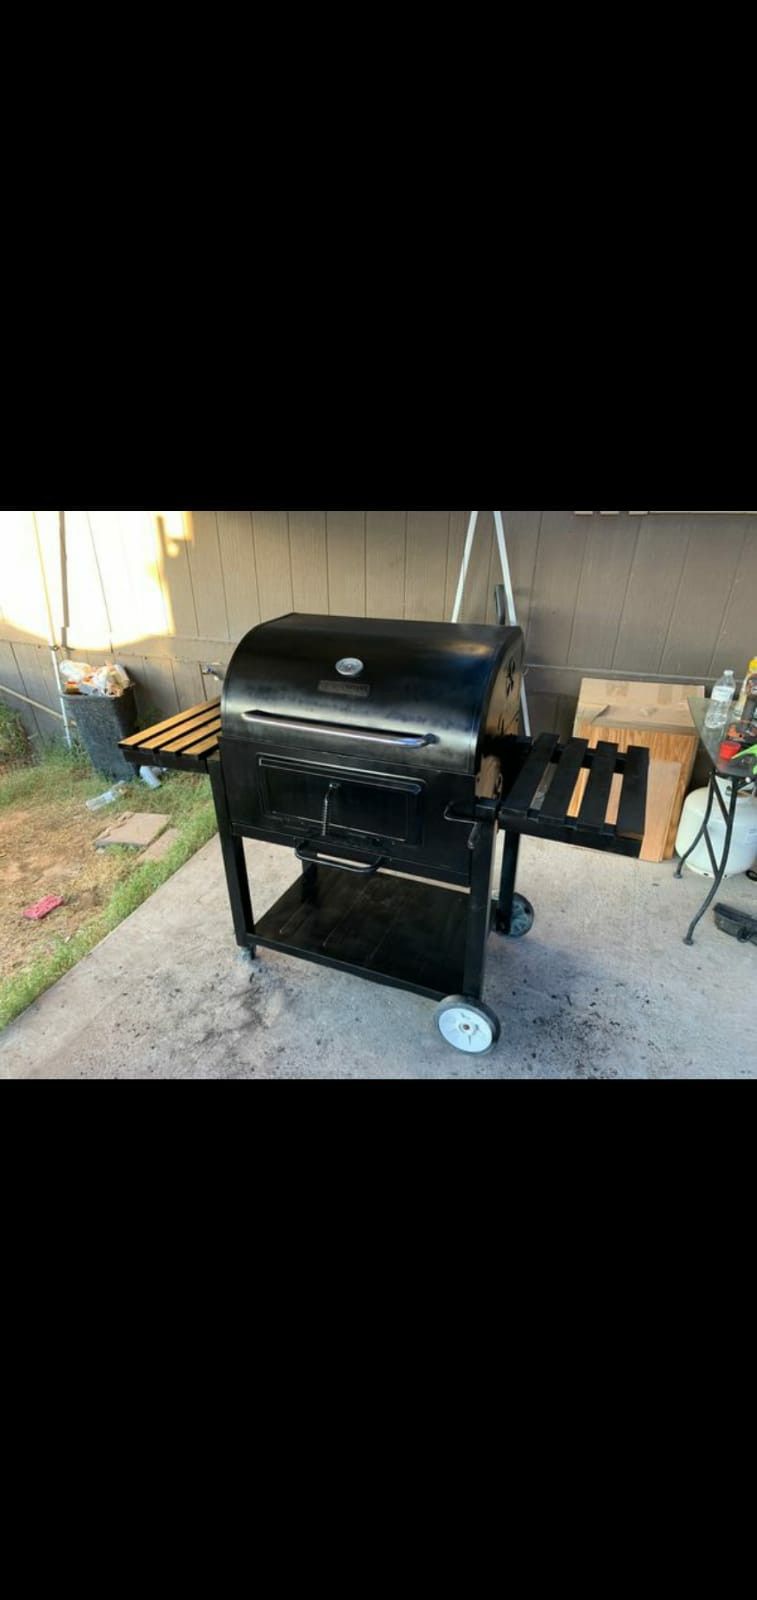 Charcoal bbq grill for sale